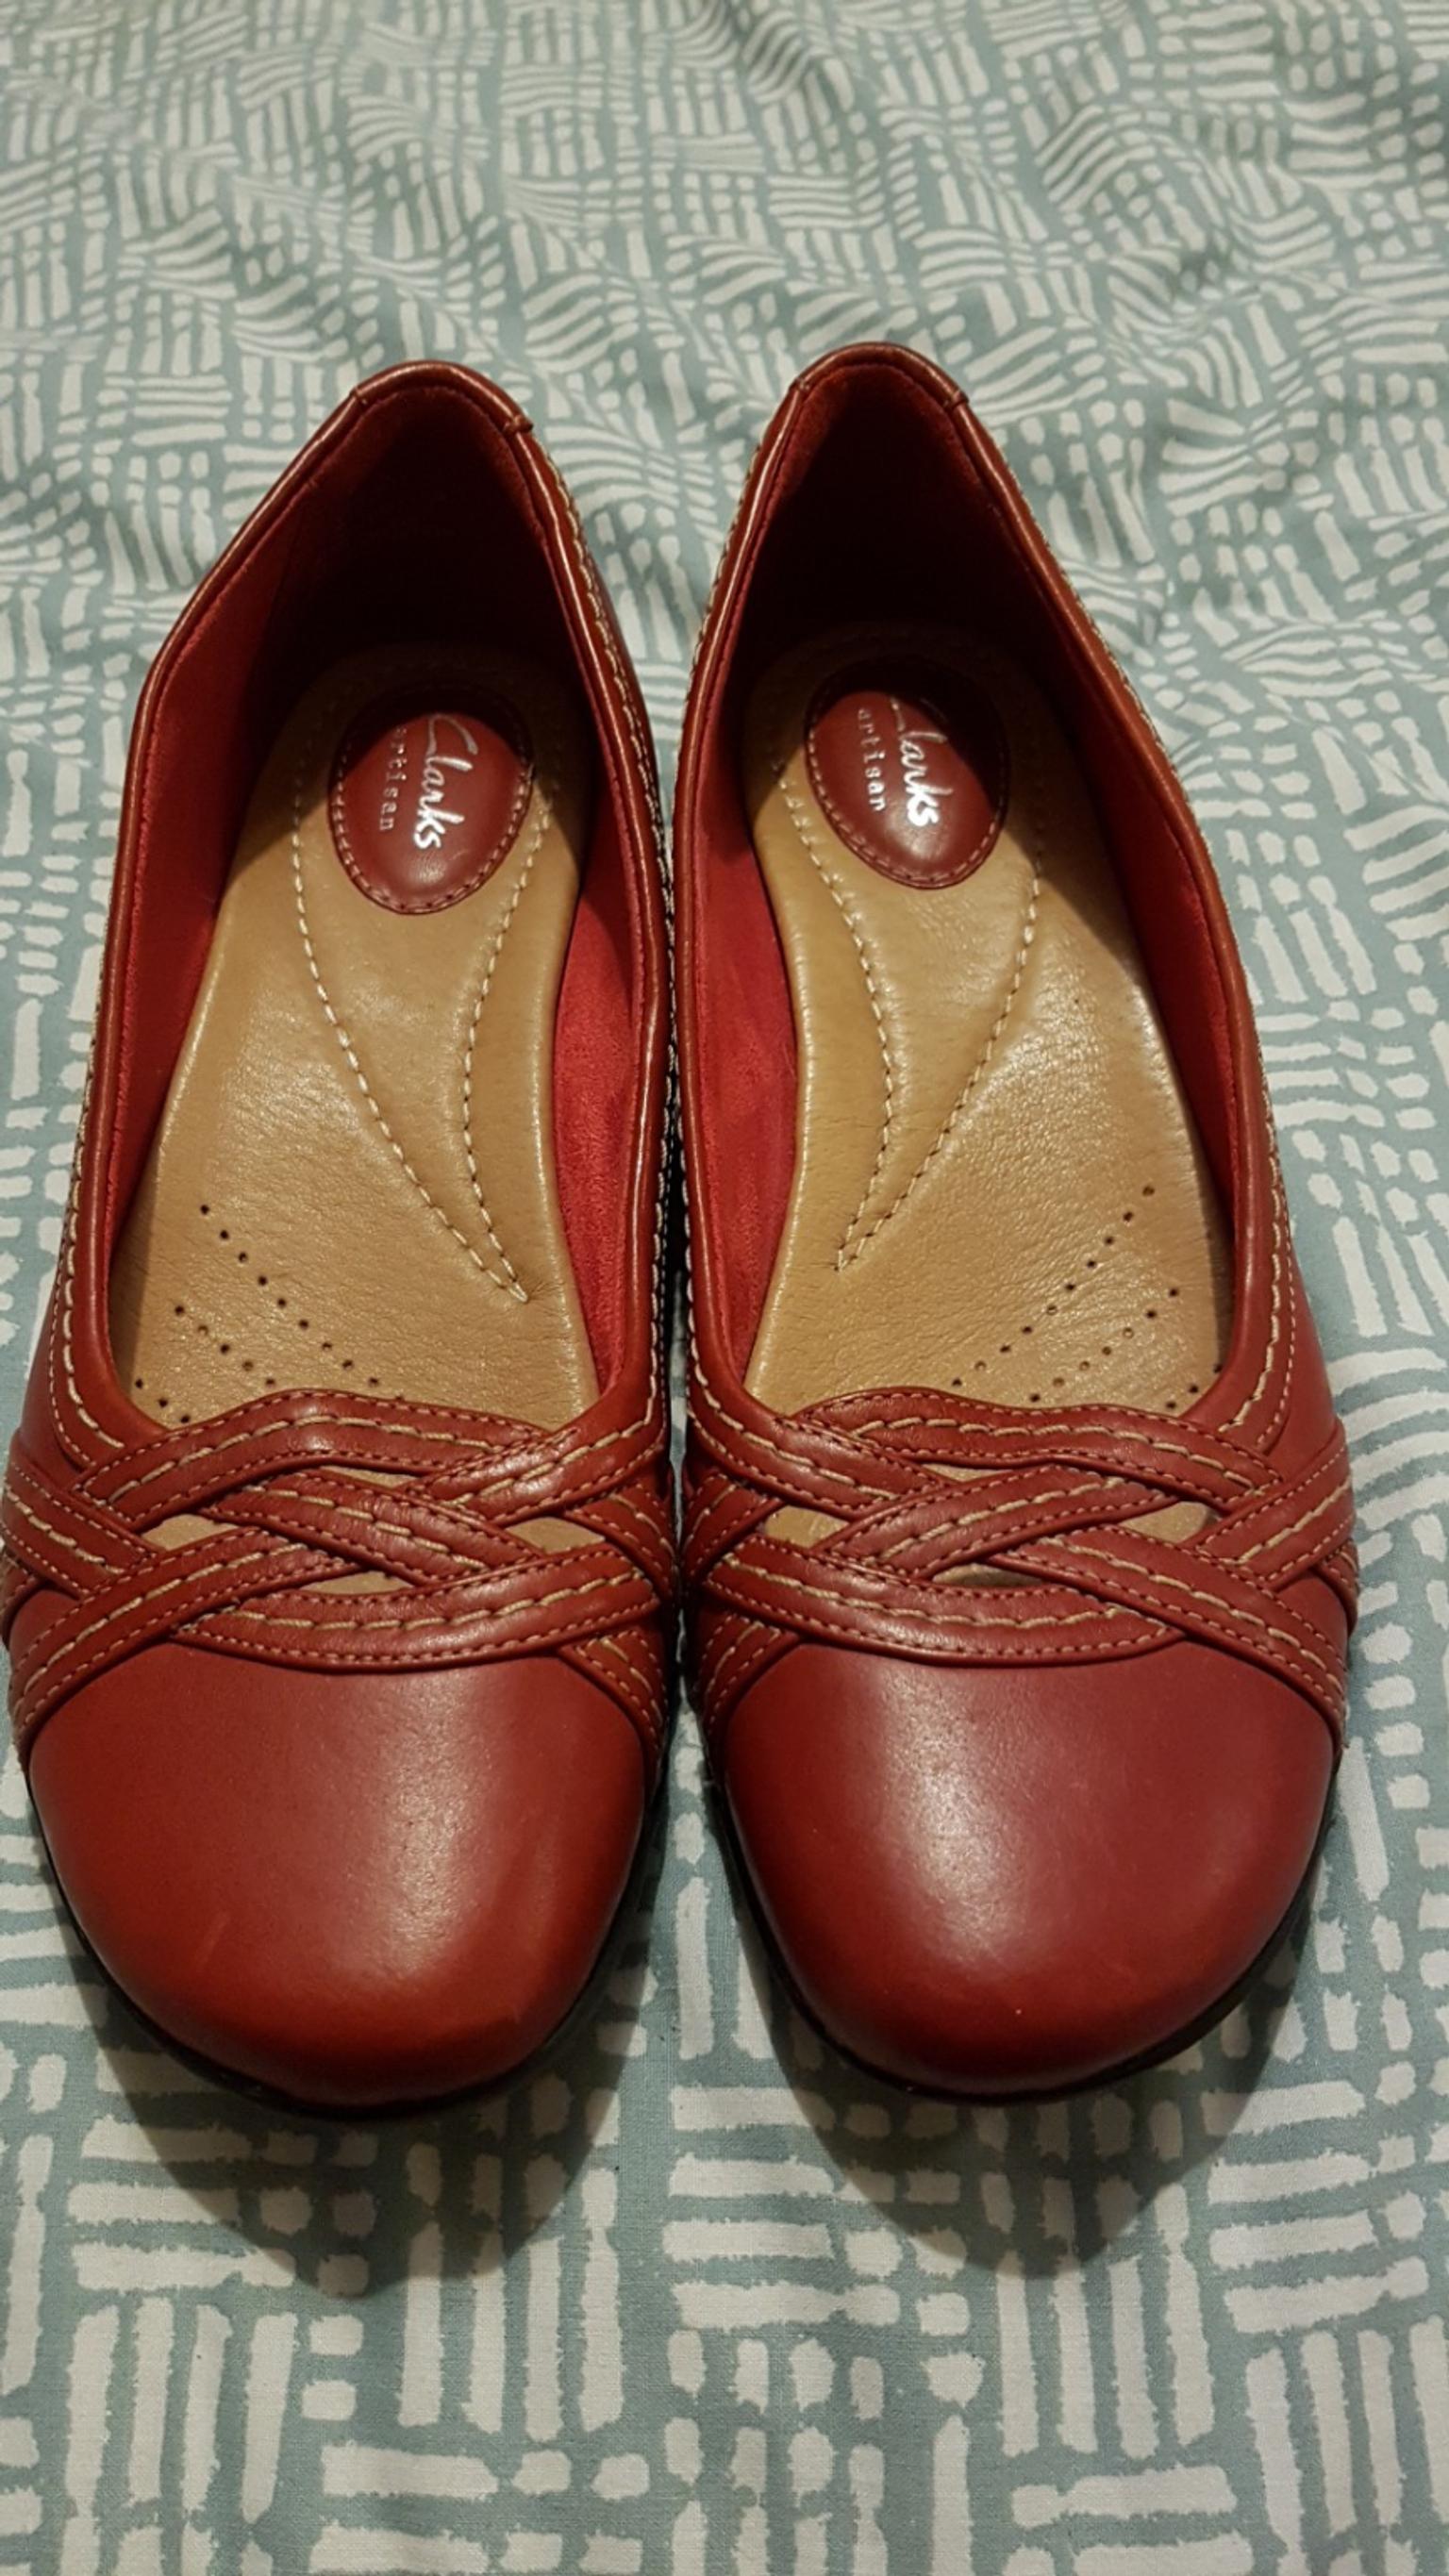 clarks size 8 womens shoes